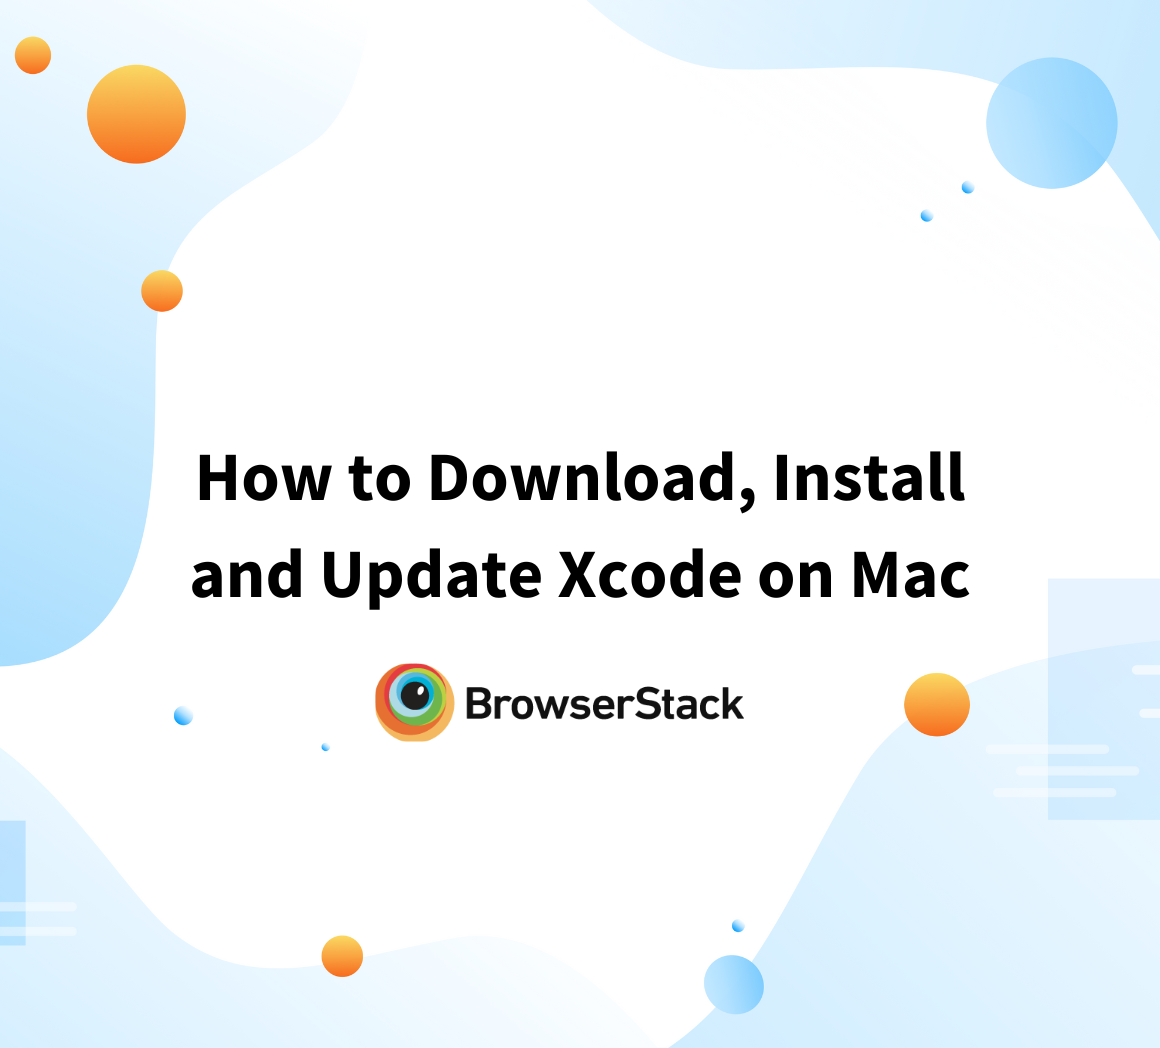 How to Download, Install and Update Xcode on Mac